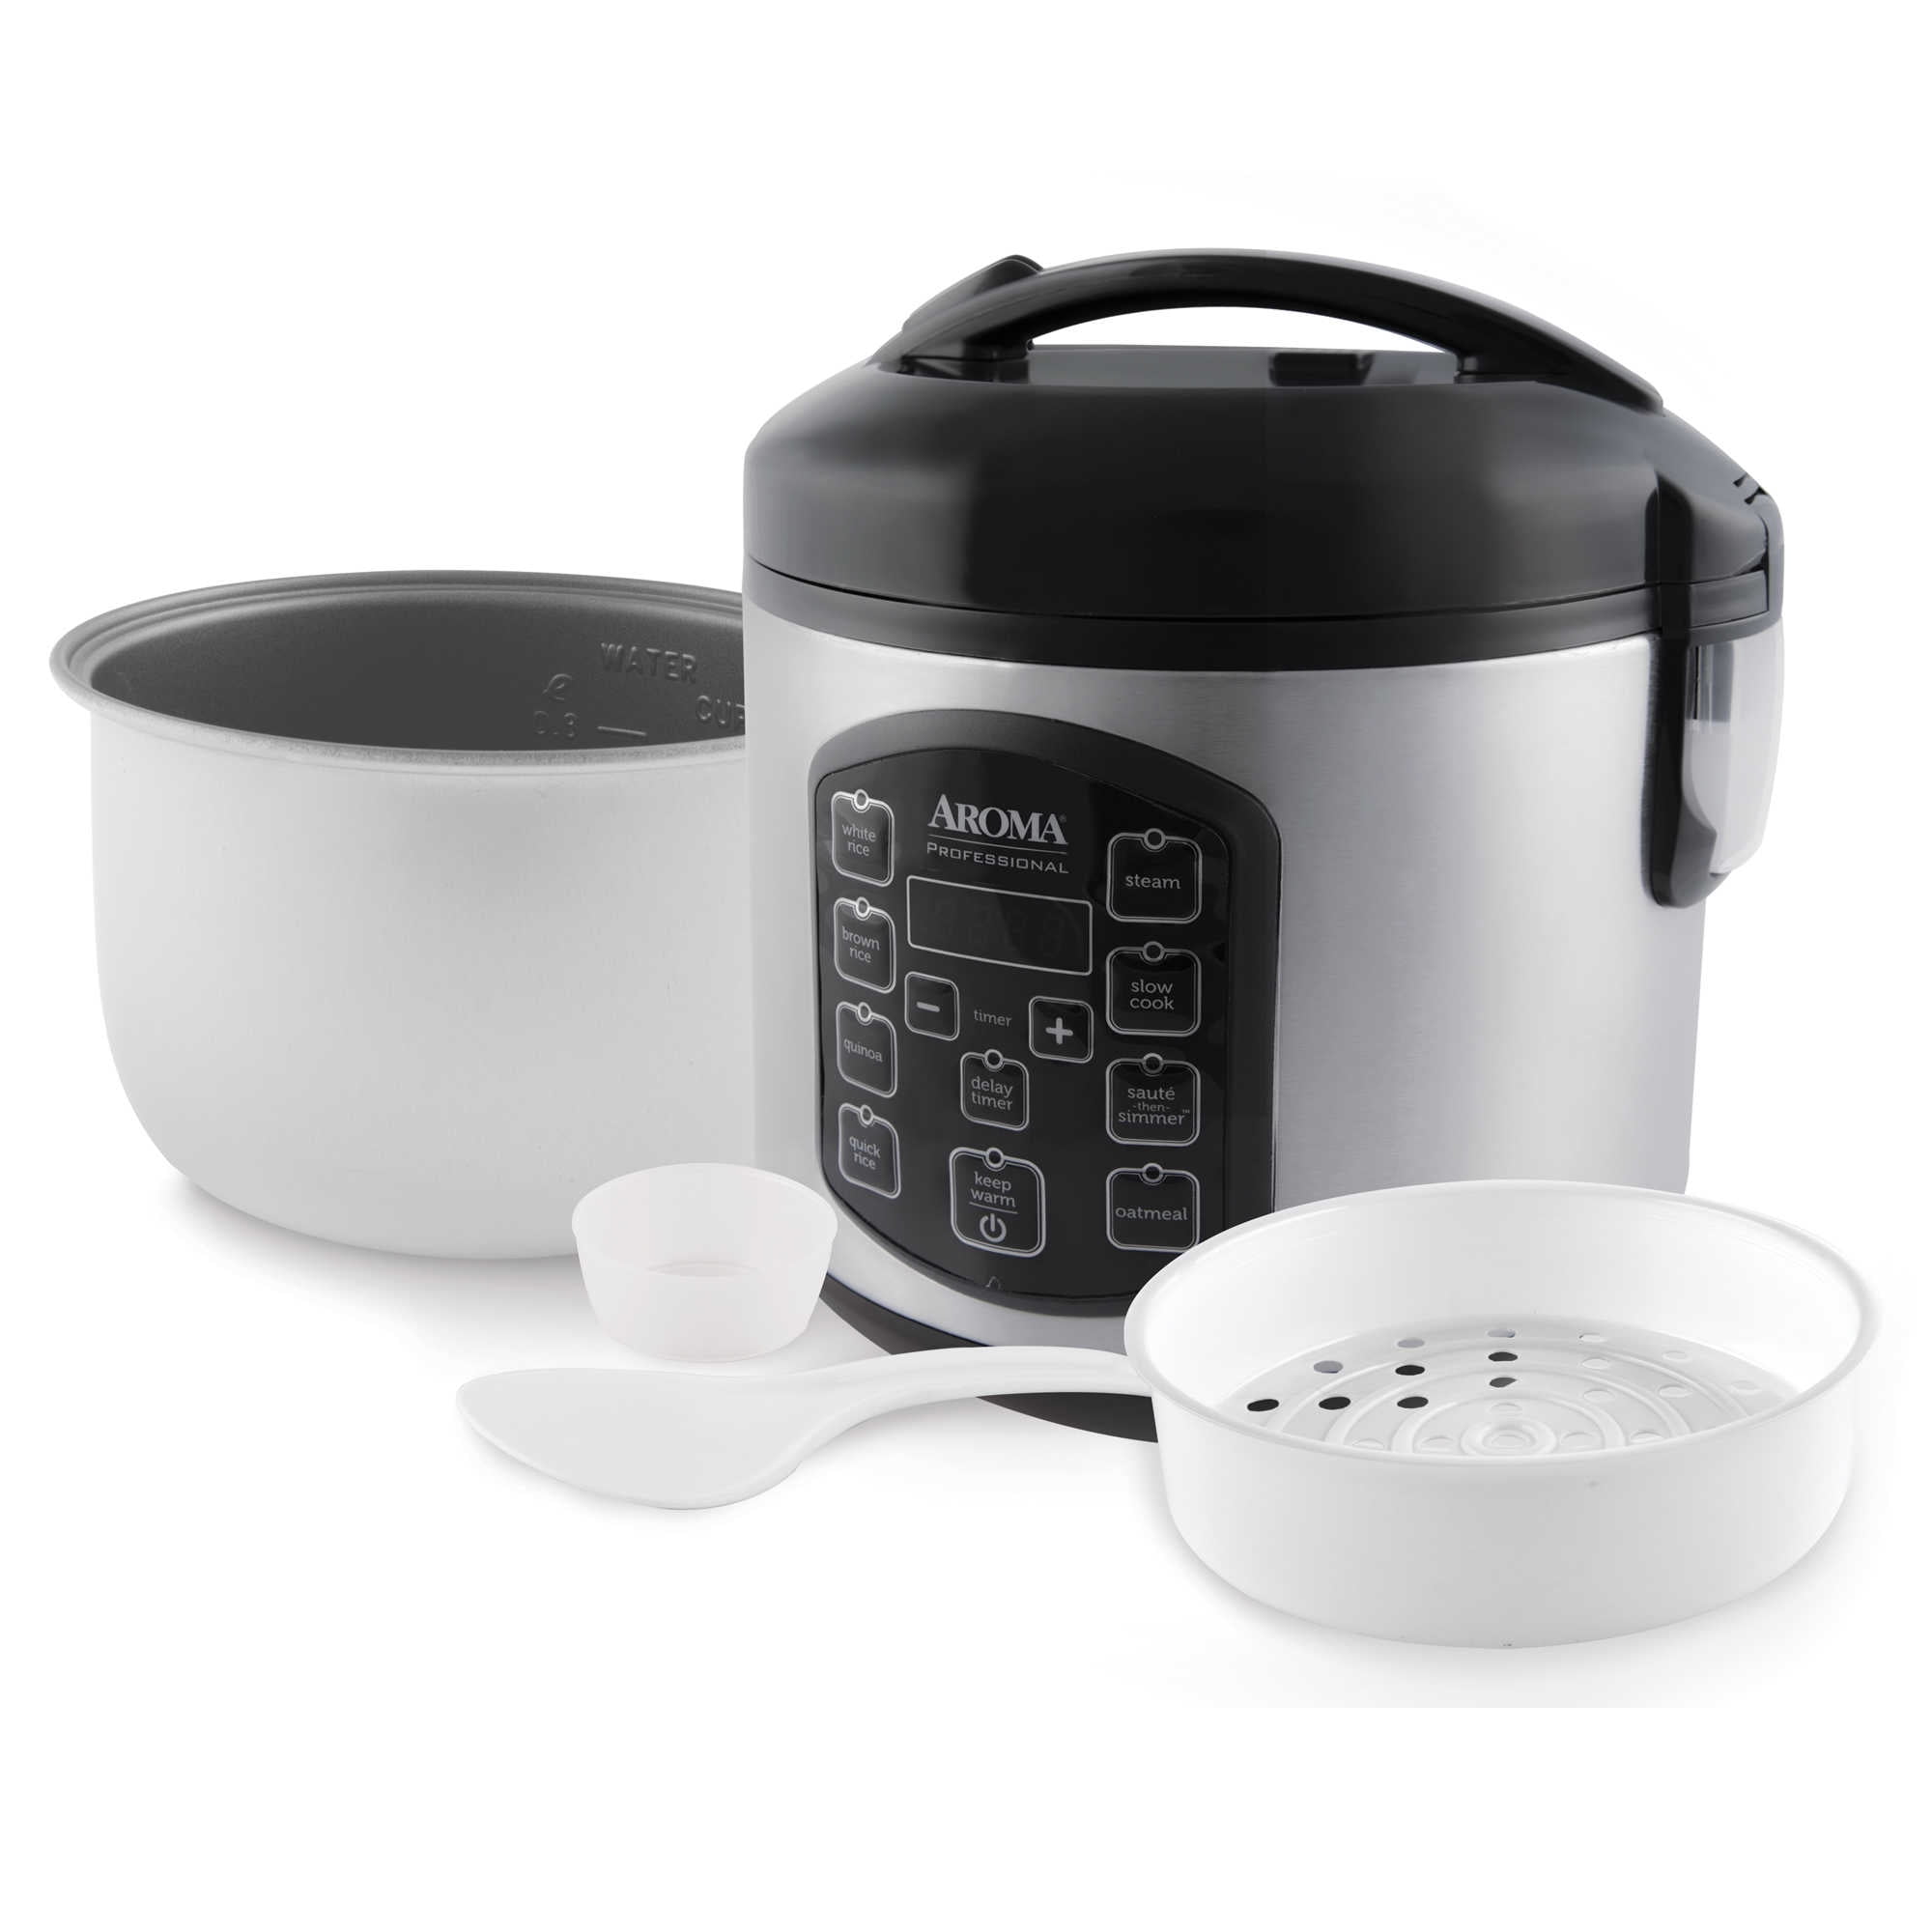 AROMA® 8-Cup (Cooked) / 2Qt. Digital Rice & Grain Multicooker [ARC